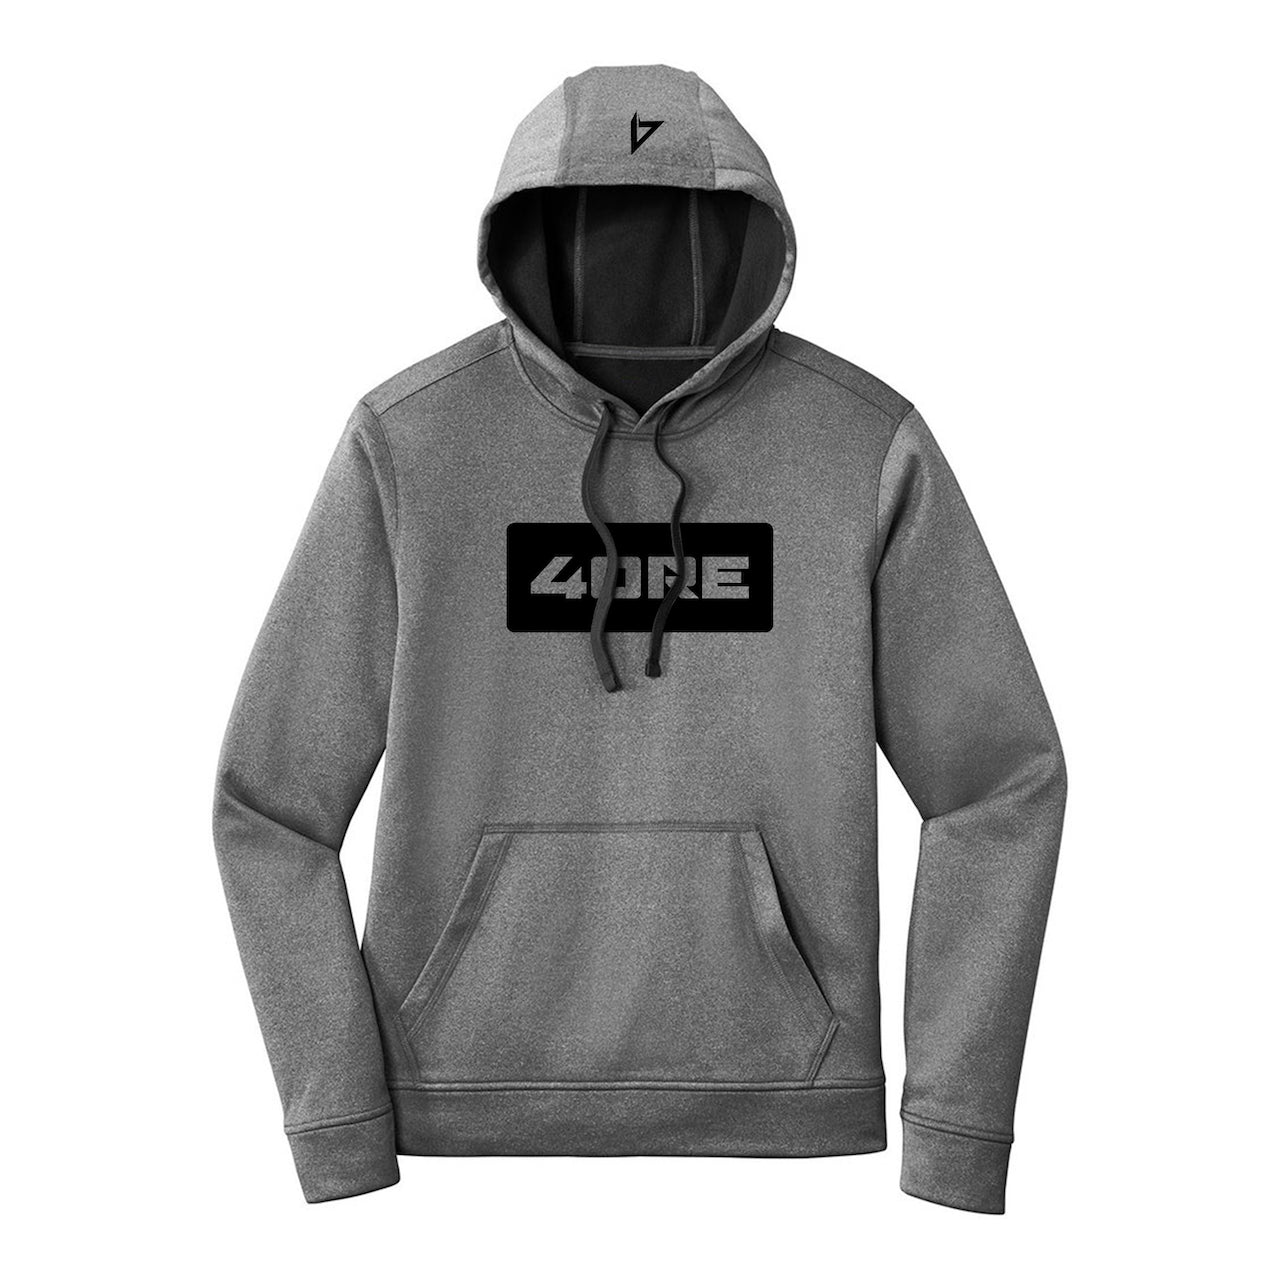 4ORE TOUR HOODIE [GRAY] LIMITED EDITION – 4ORE NUTRITION